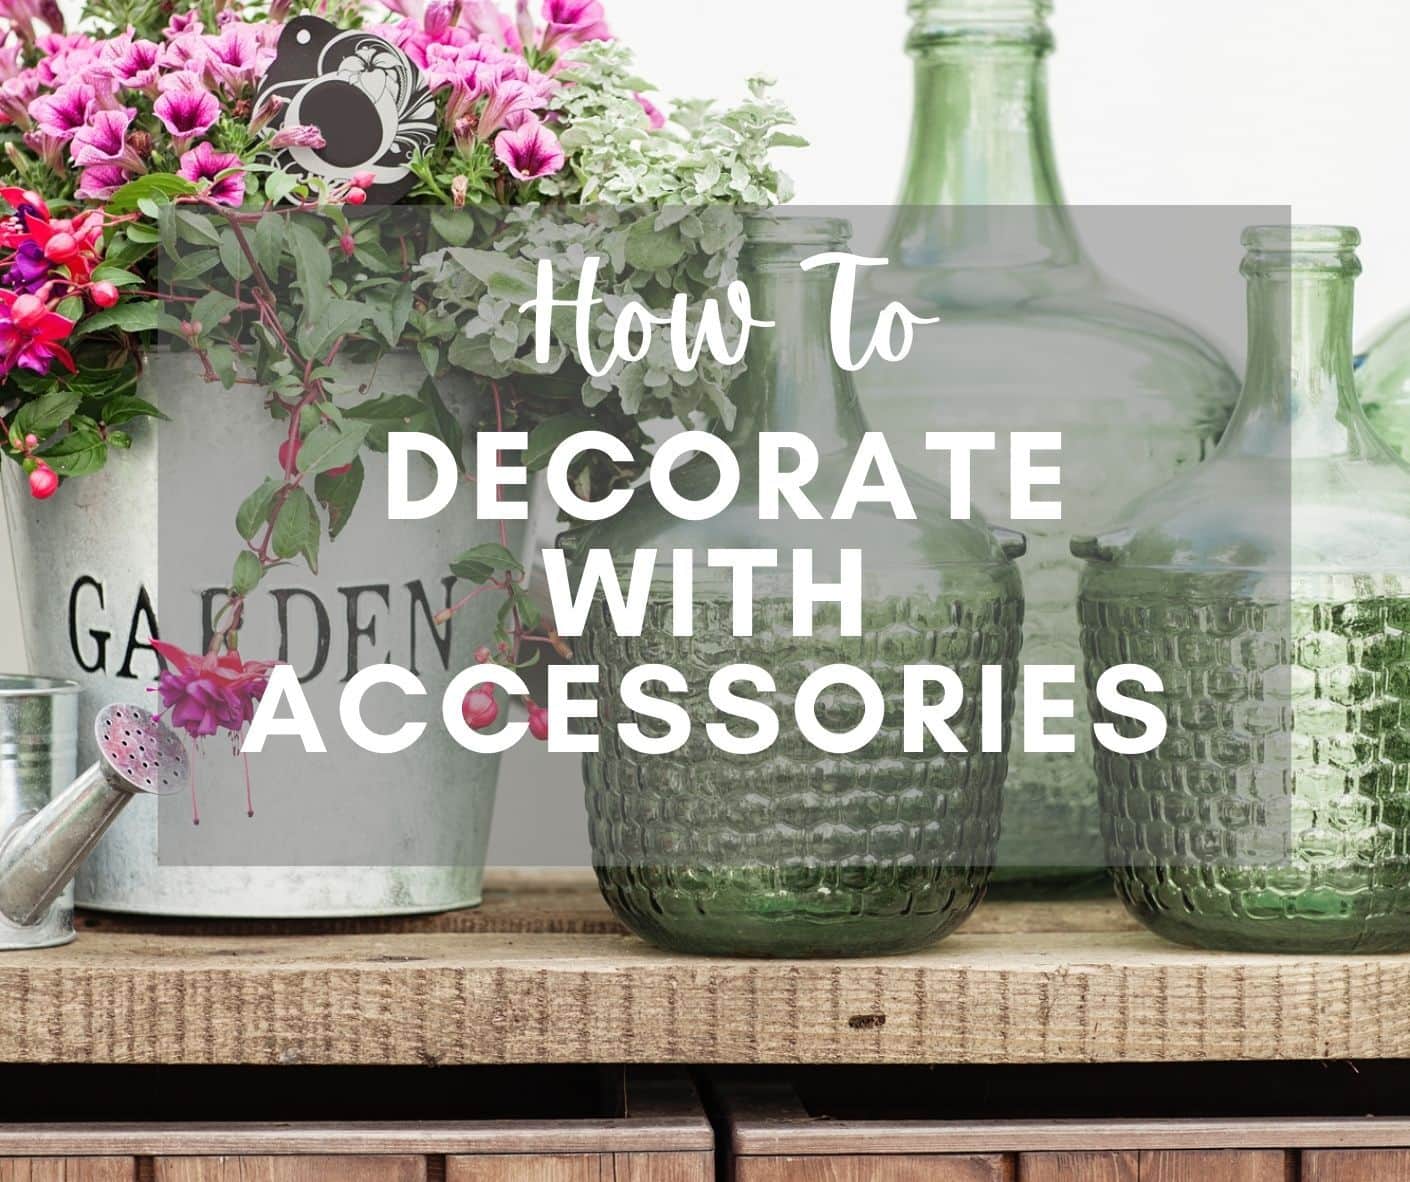 How to decorate with accessories - green bottles and a white garden bucket with flowers